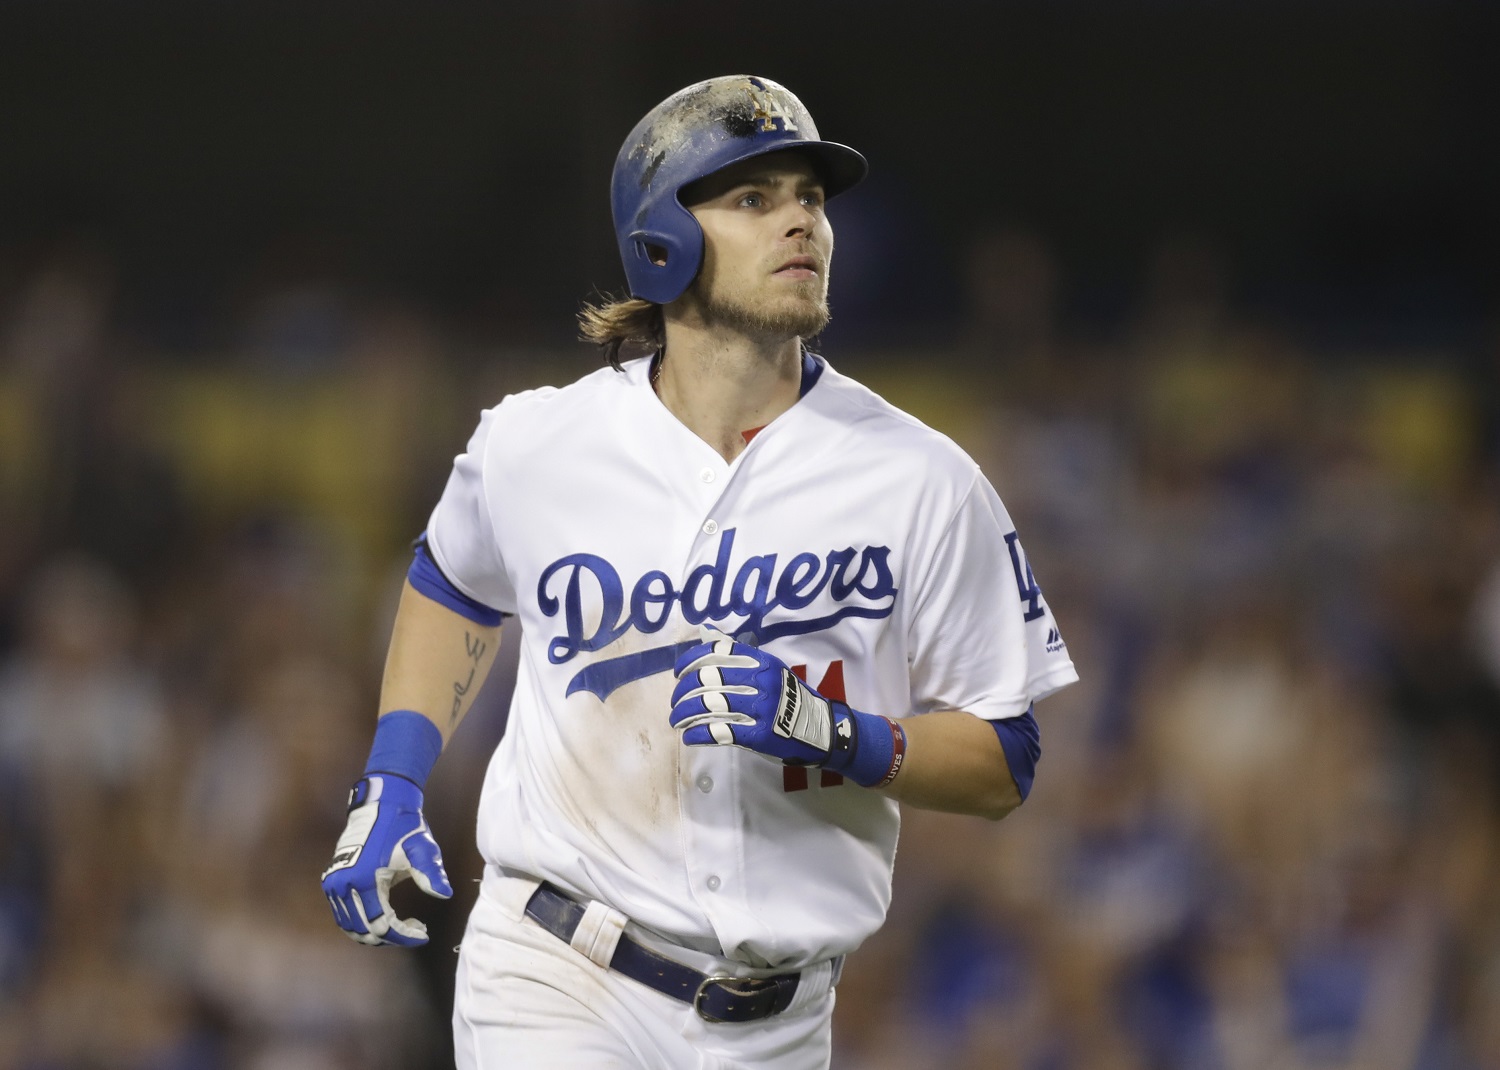 Los Angeles Dodgers' Josh Reddick watches the flight of his grand slam during the seventh inning of a baseball game against the Colorado Rockies, Saturday, Sept. 24, 2016, in Los Angeles. (AP Photo/Jae C. Hong)